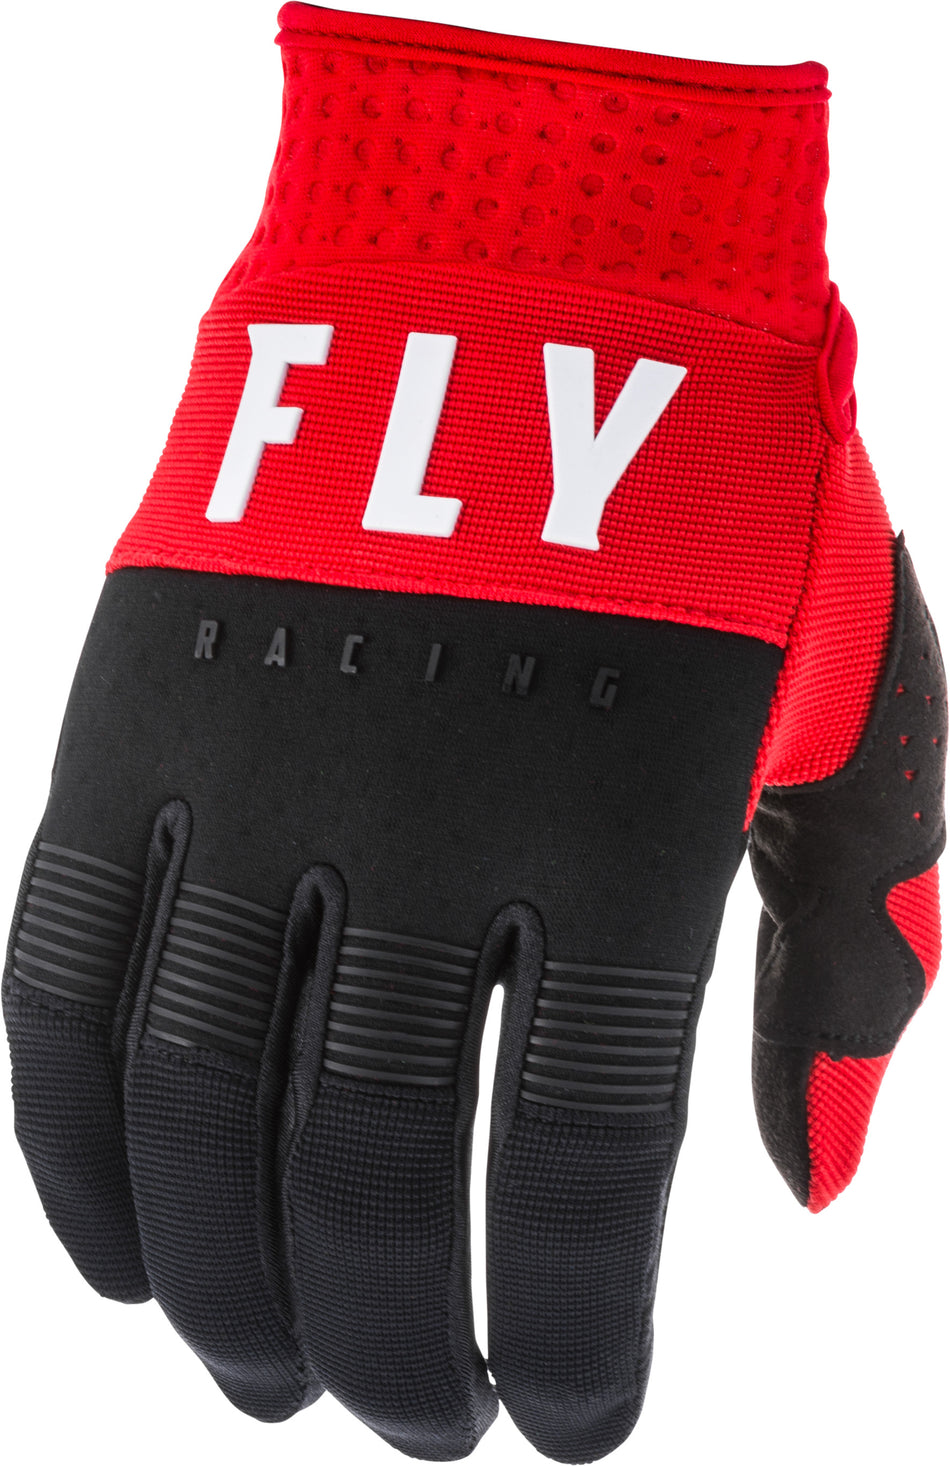 FLY RACING F-16 Gloves Red/Black/White Sz 03 373-91303